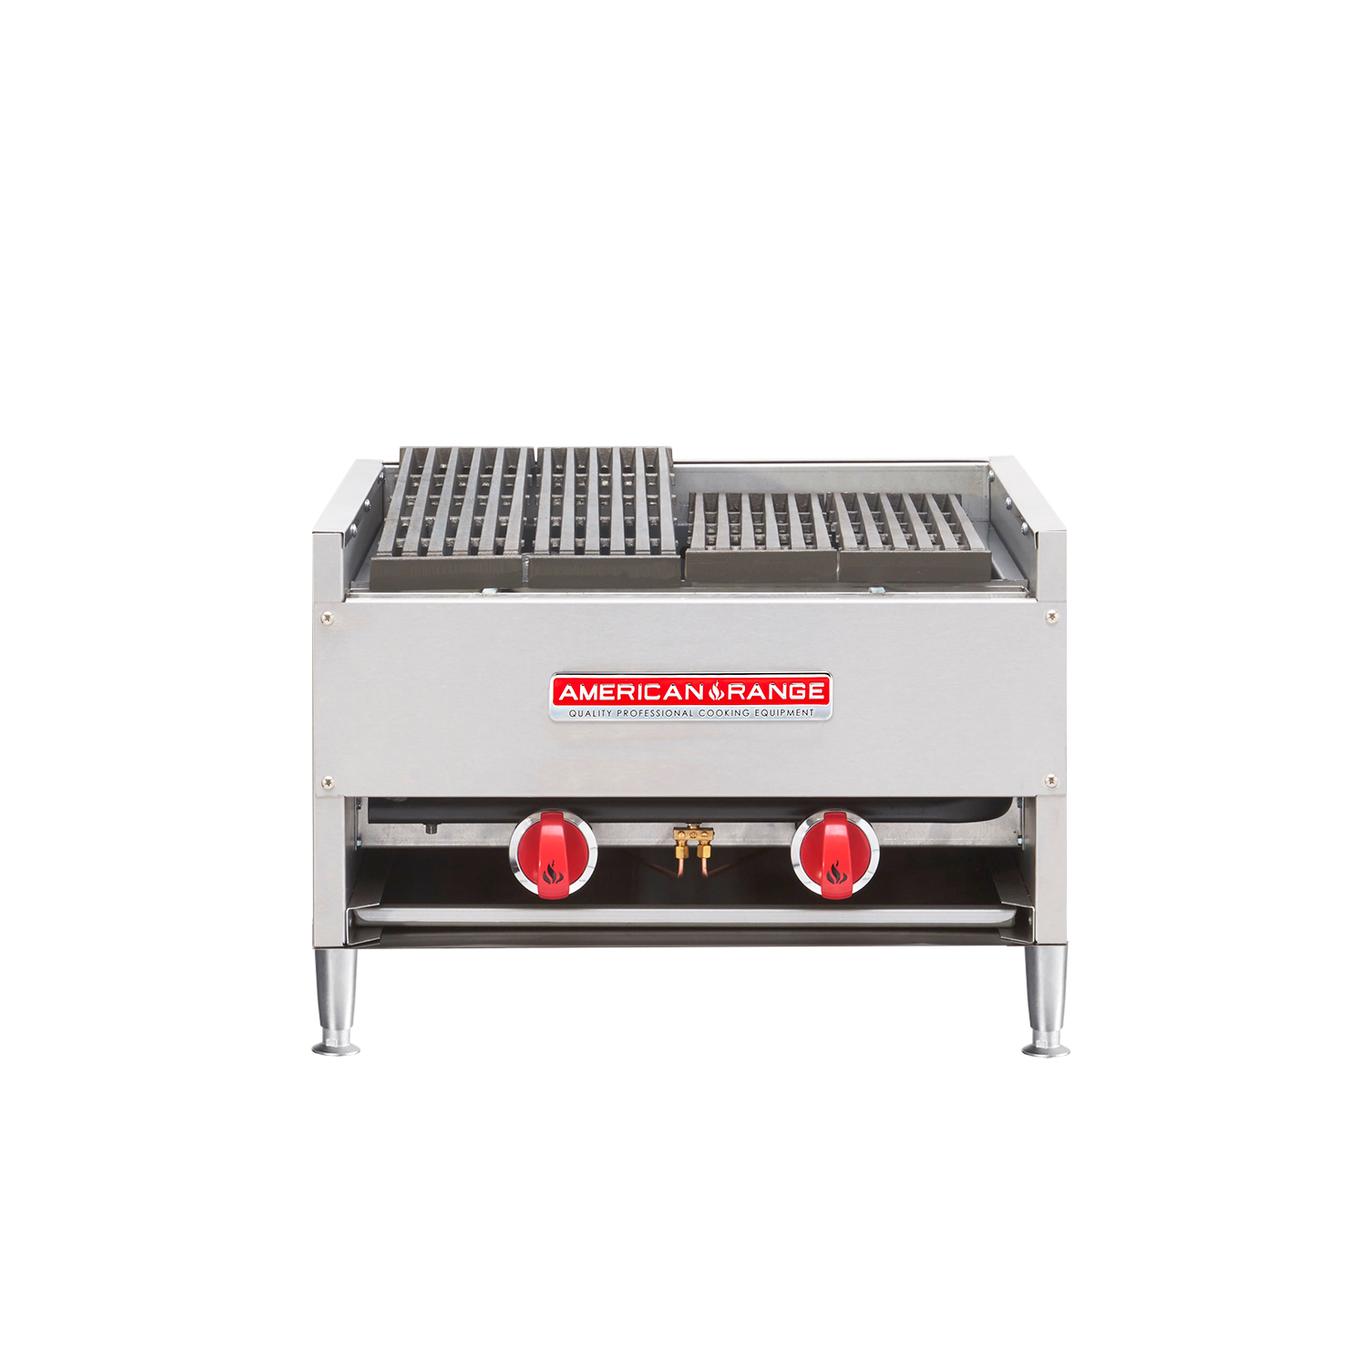 American Range Aecb-24 Heavy Duty 24 Inch Lava Rock Gas Charbroiler Counter  MO for sale online eBay